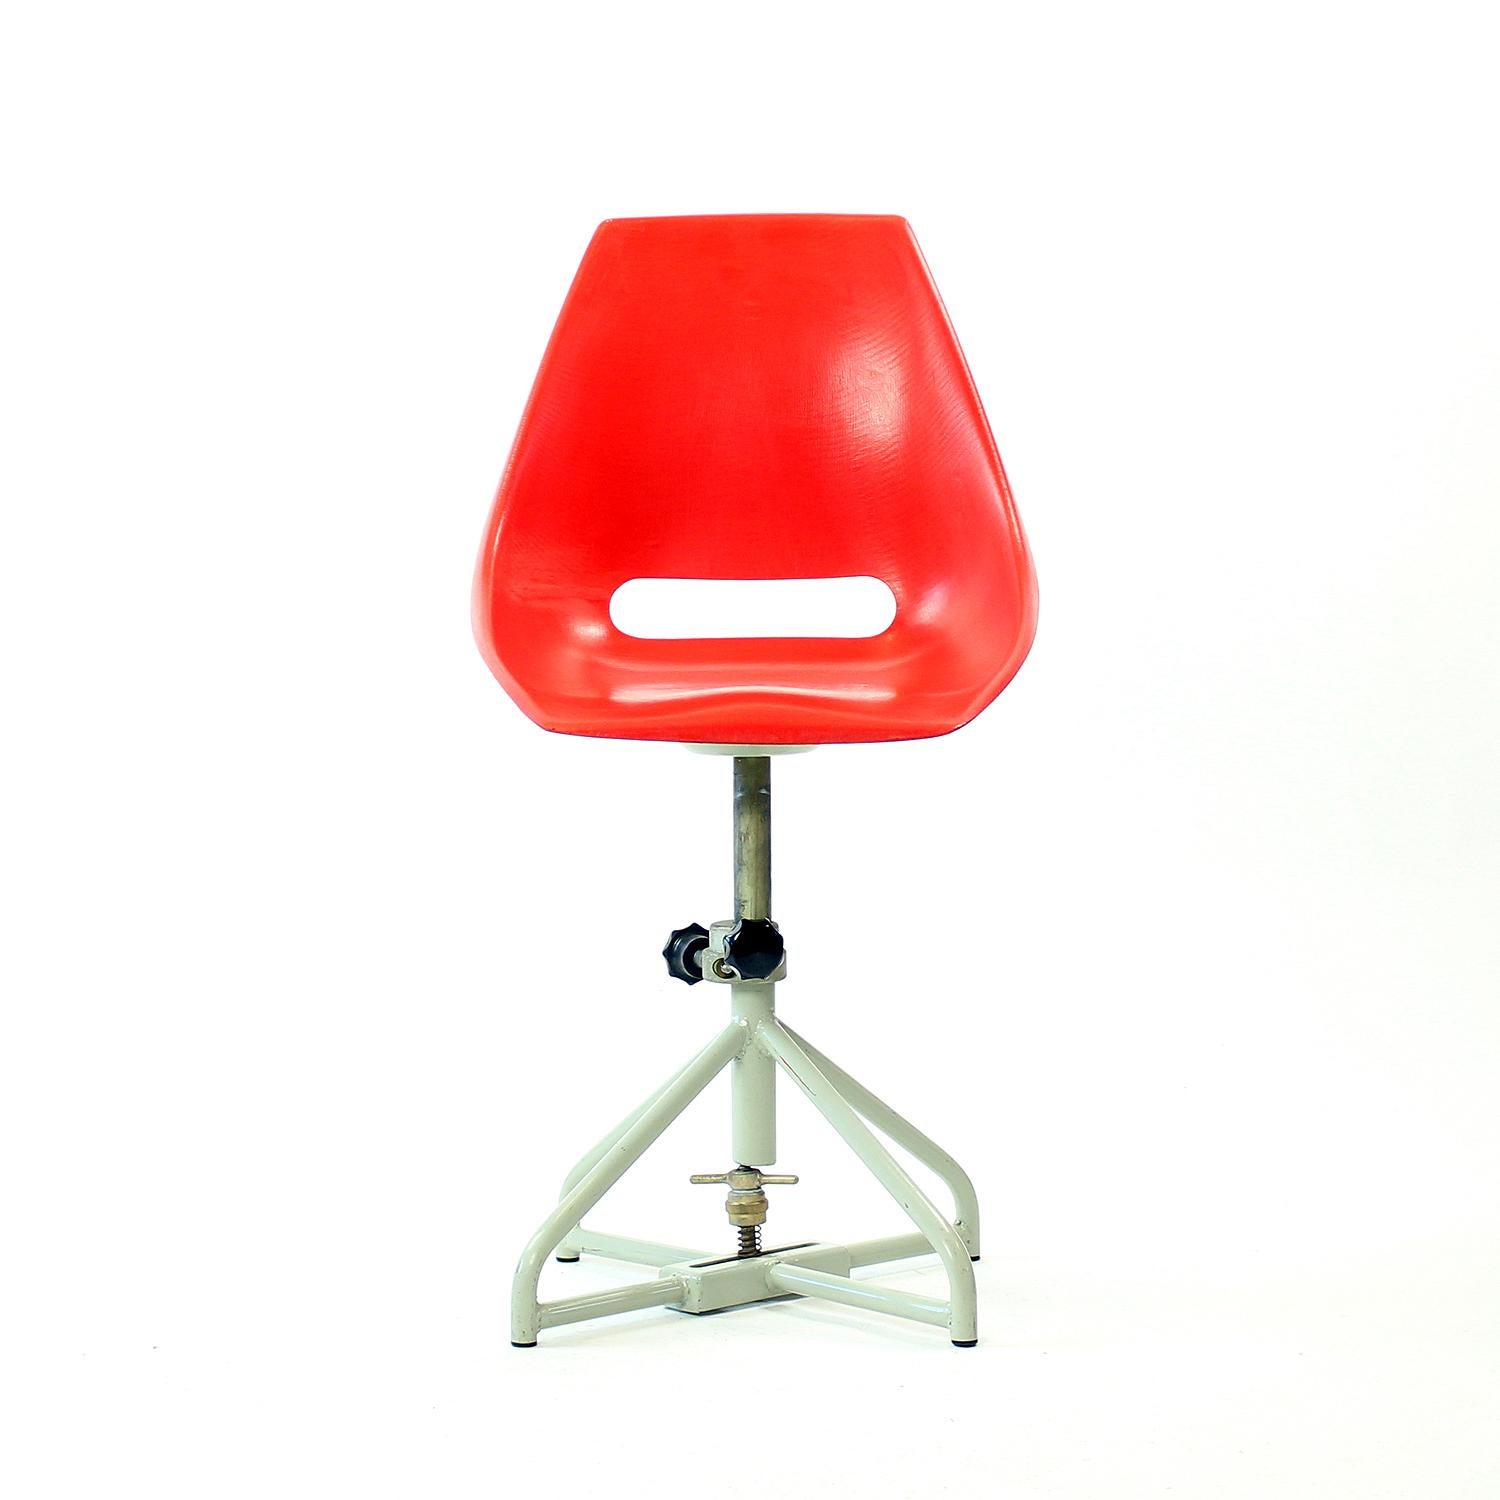 Great industrial chair from midcentury era of Czechoslovakia. Designed by Miroslav Navratil for Vertext company in 1960s. Some of the chairs still have the original Vertex label visible. The chairs were originally used as seats in trams in the